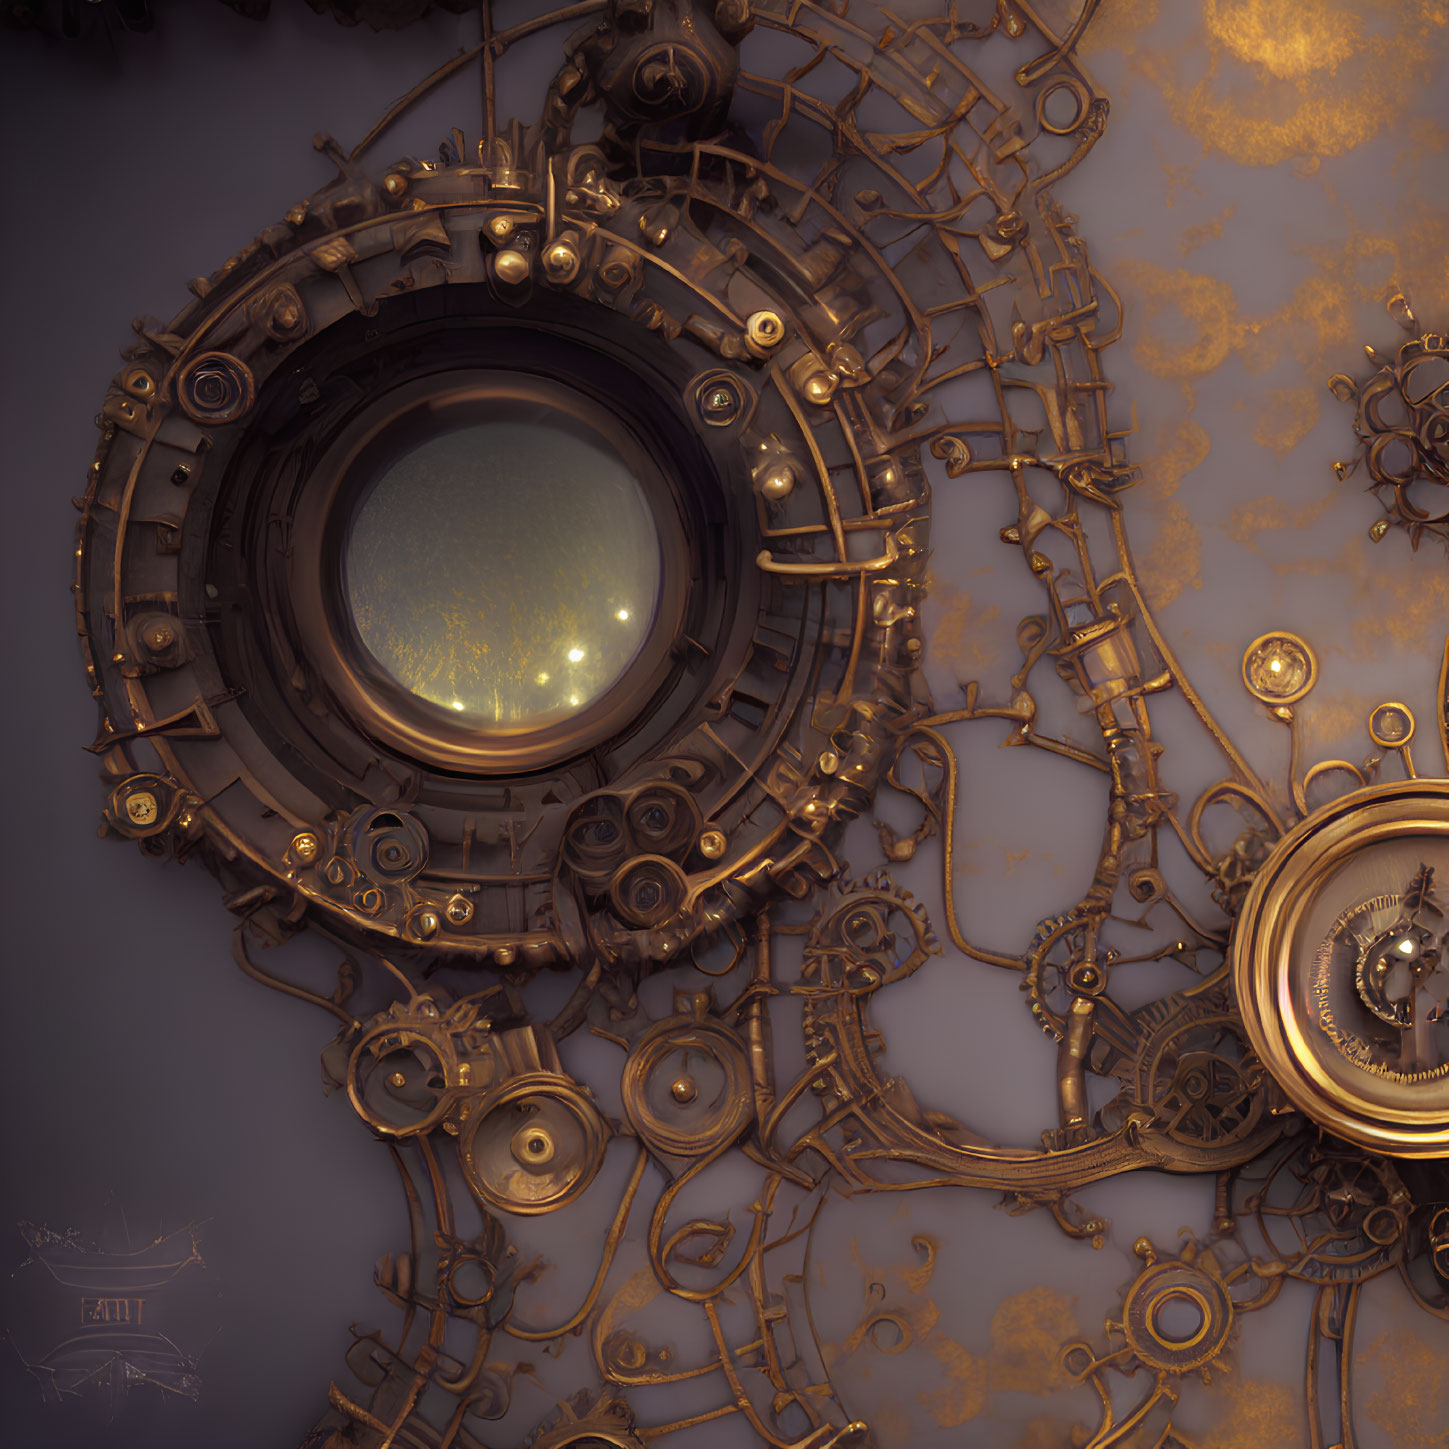 Detailed Steampunk-Style Circular Window with Gears and Pipes